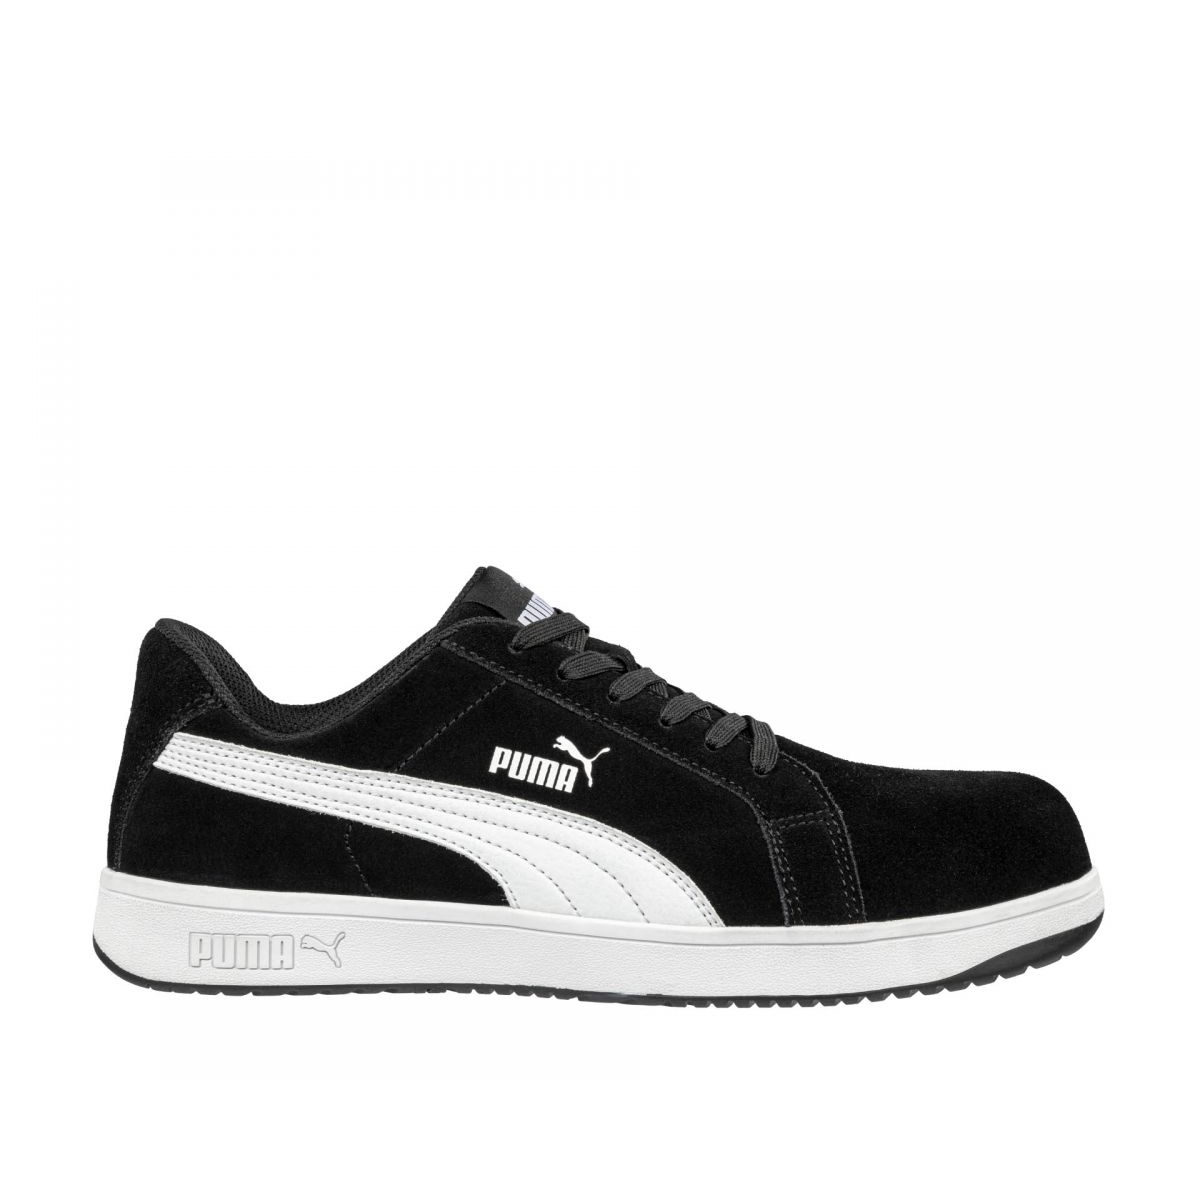 PUMA Safety Women's Iconic Low Composite Toe EH Work Shoes Black Suede - 640115 BLACK - BLACK, 6